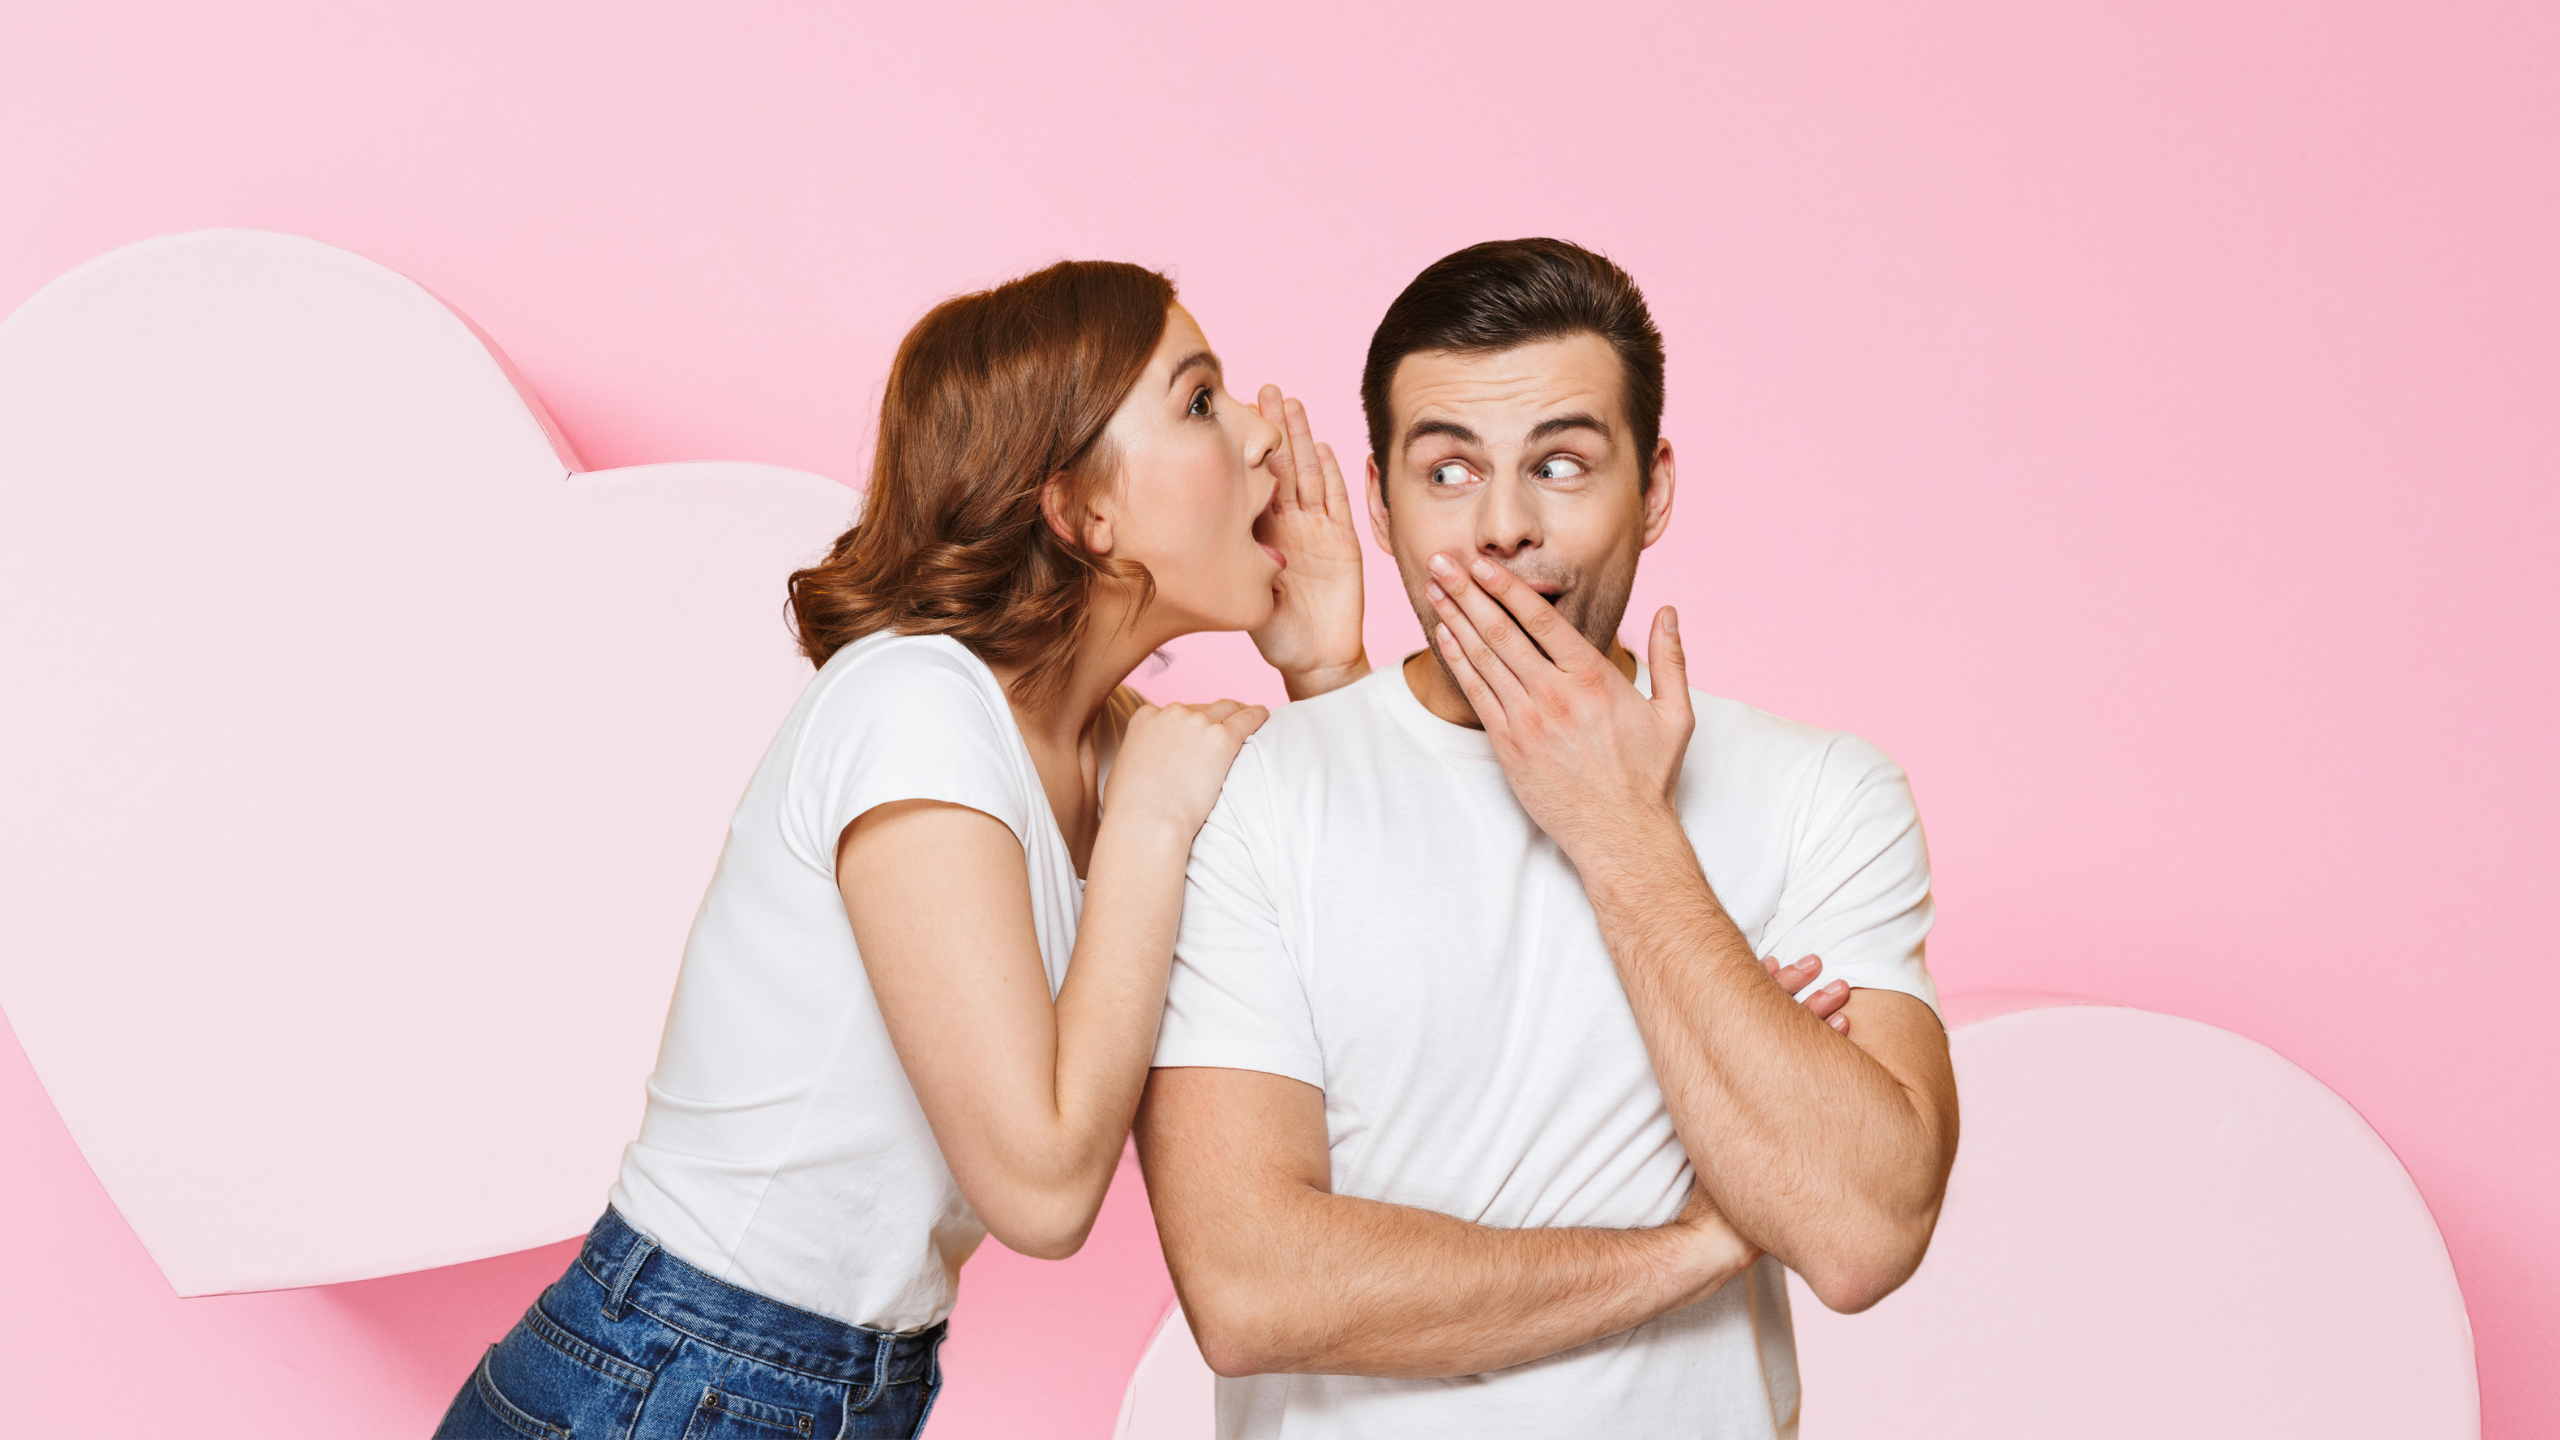 How to Know if She Likes You: Subtle Signs Every Man Should Recognize